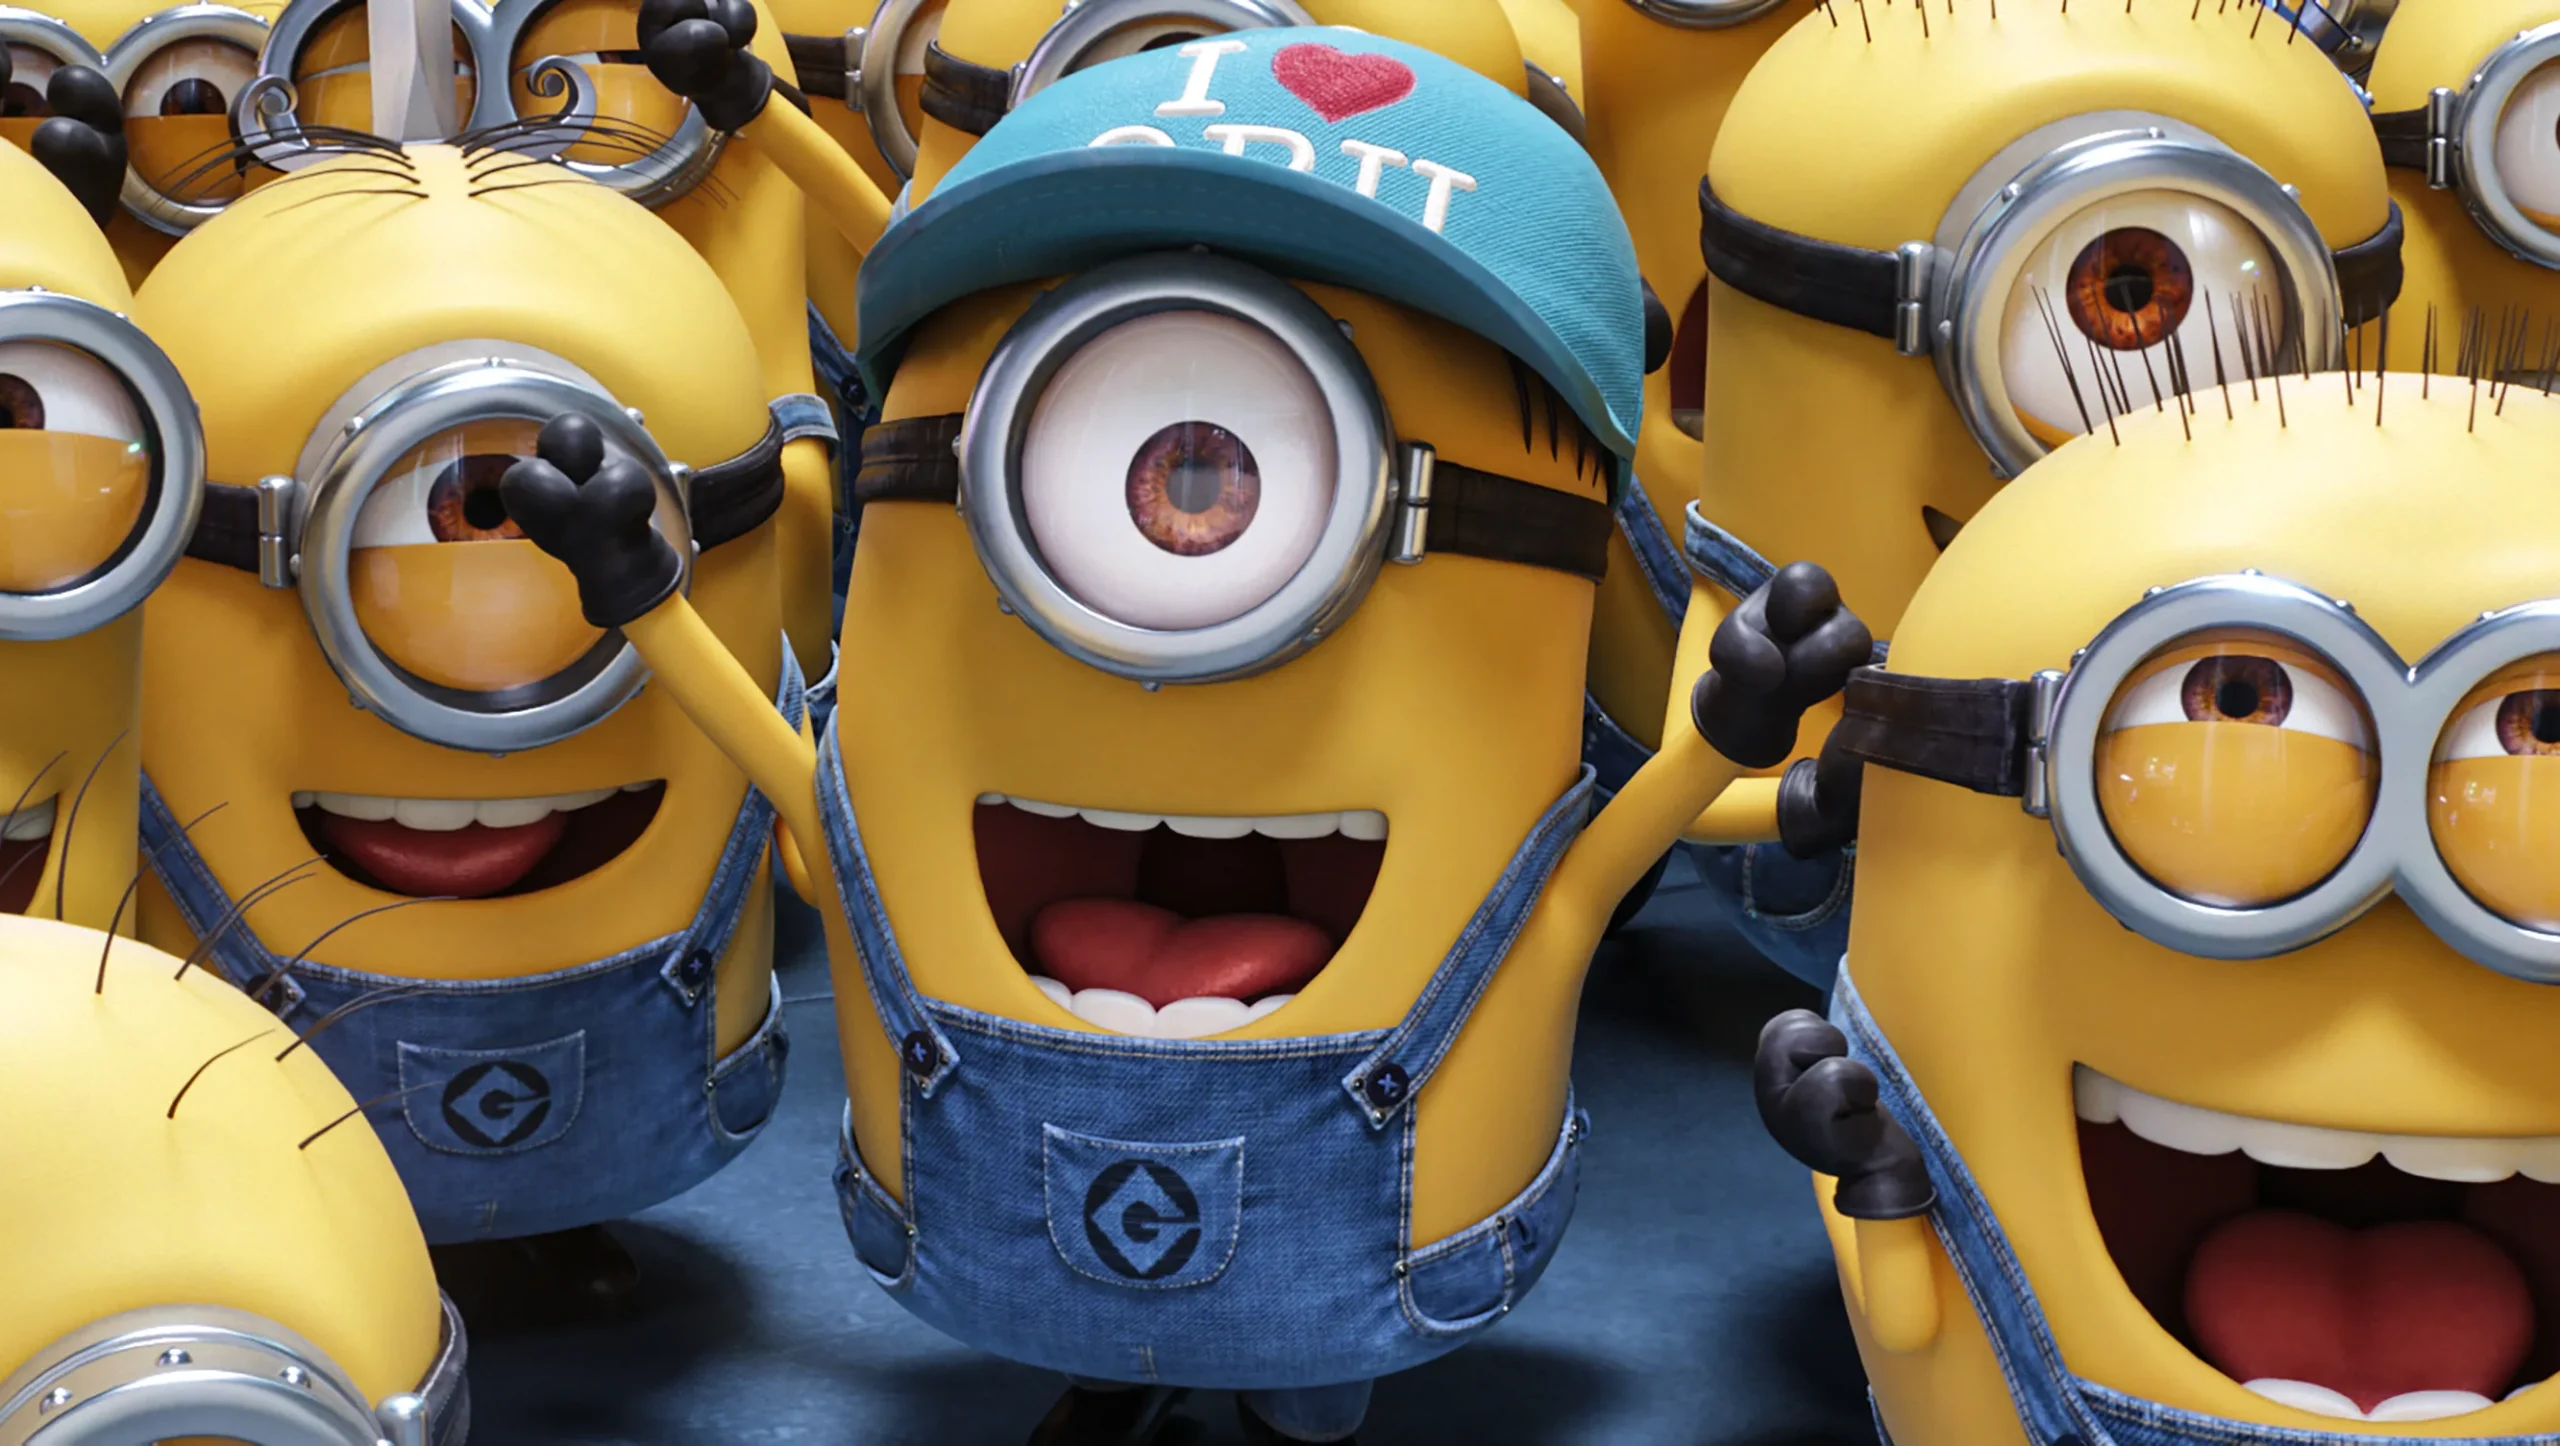 Exciting Sneak Peek 'Despicable Me 4' Brings More Minion Fun and Gru's New Adventures in 2024-----